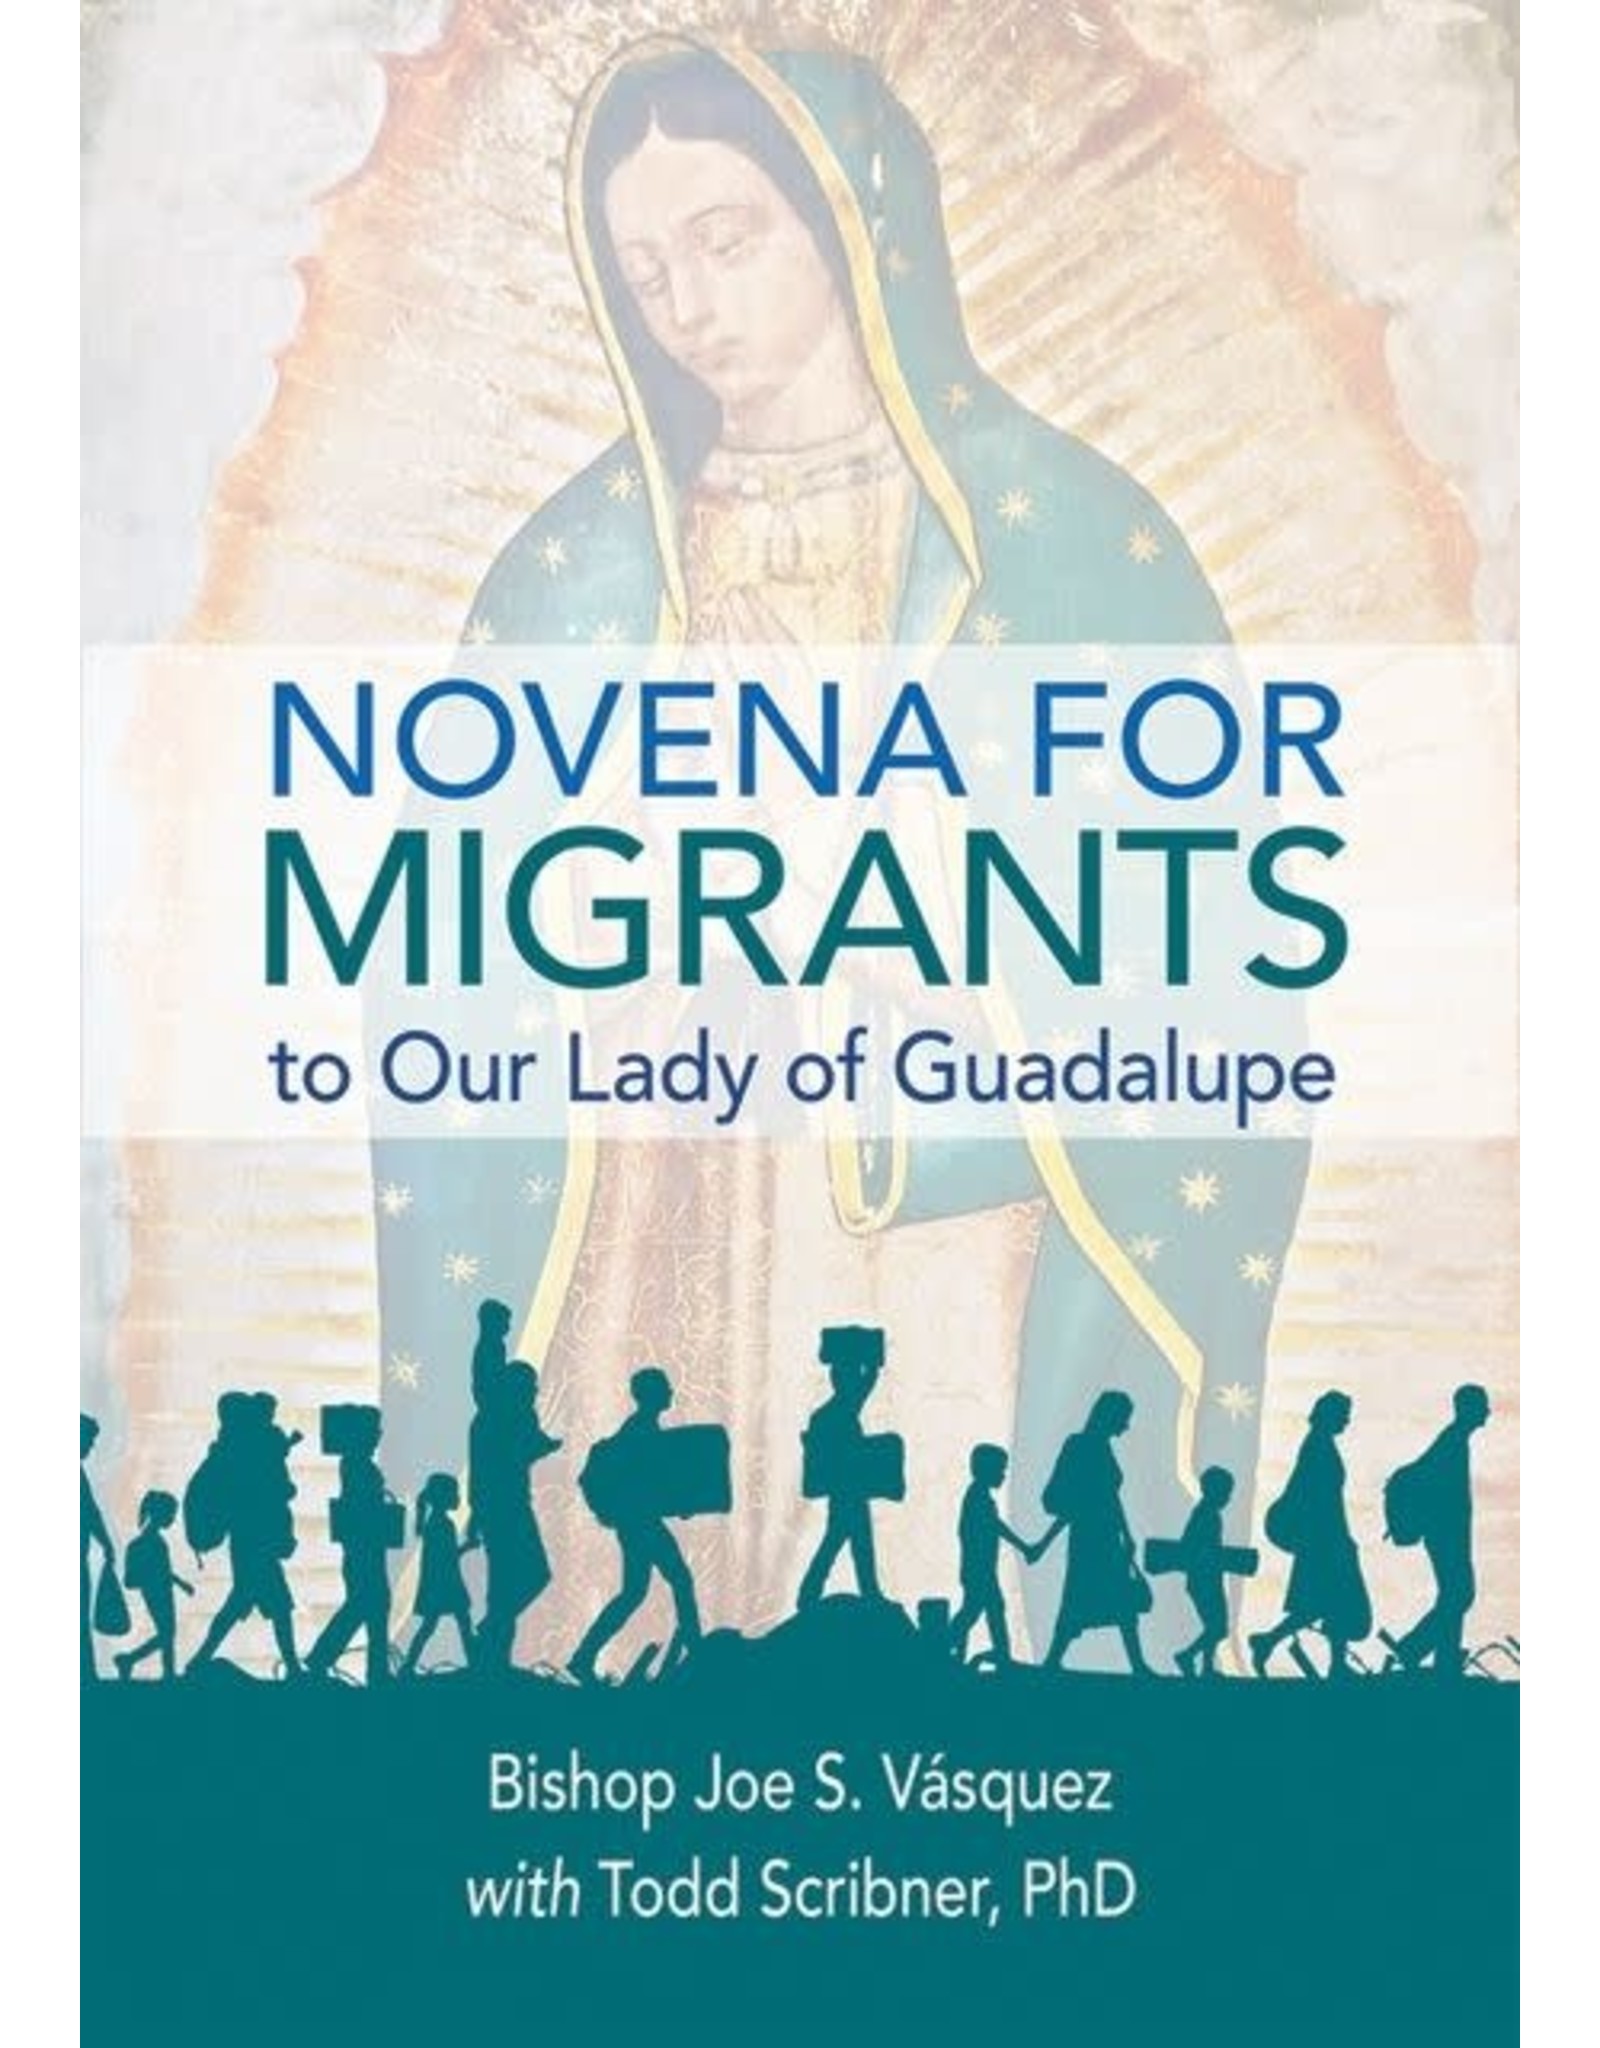 Novena for Migrants to Our Lady of Guadalupe